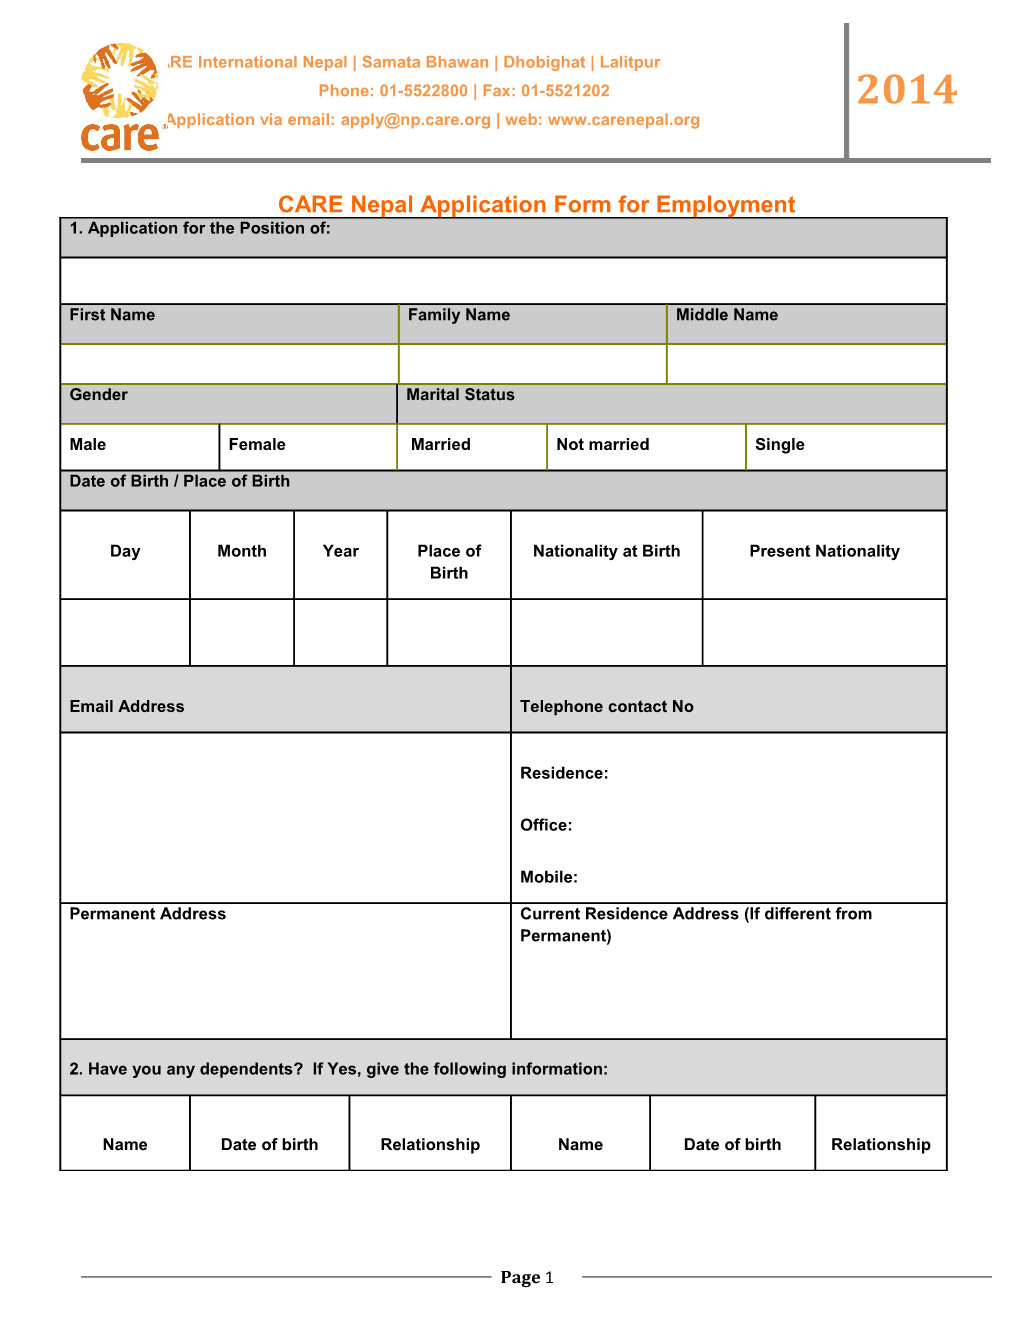 CARE Nepal Application Form for Employment